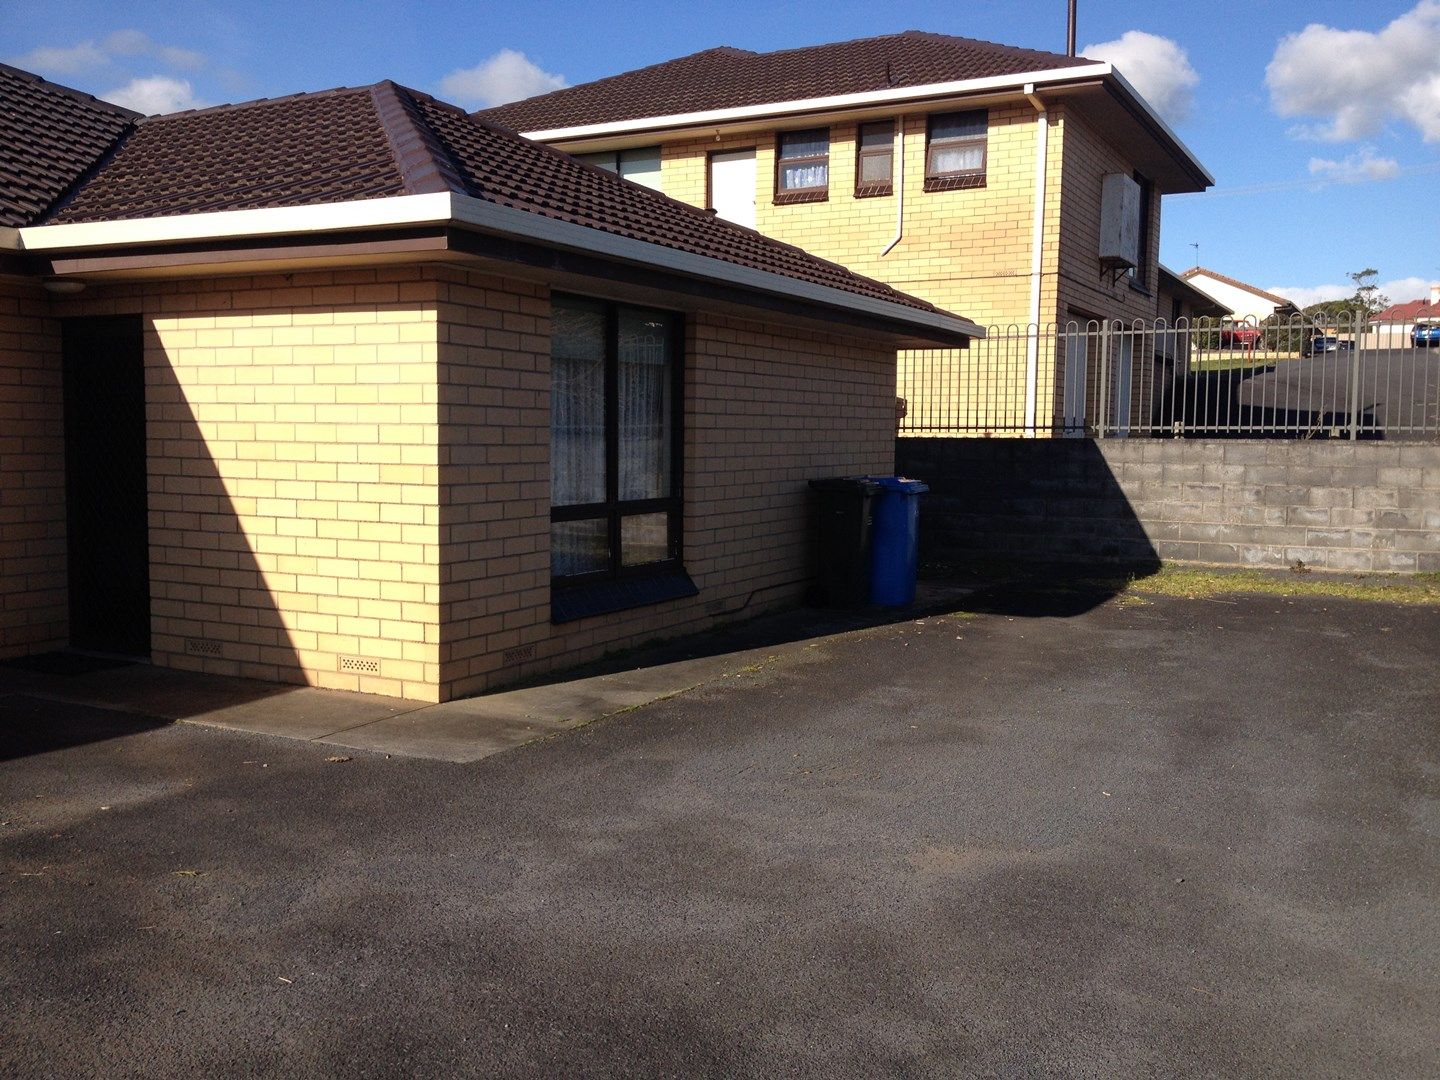 3 bedrooms Apartment / Unit / Flat in 3/44 WEHL STREET NORTH MOUNT GAMBIER SA, 5290